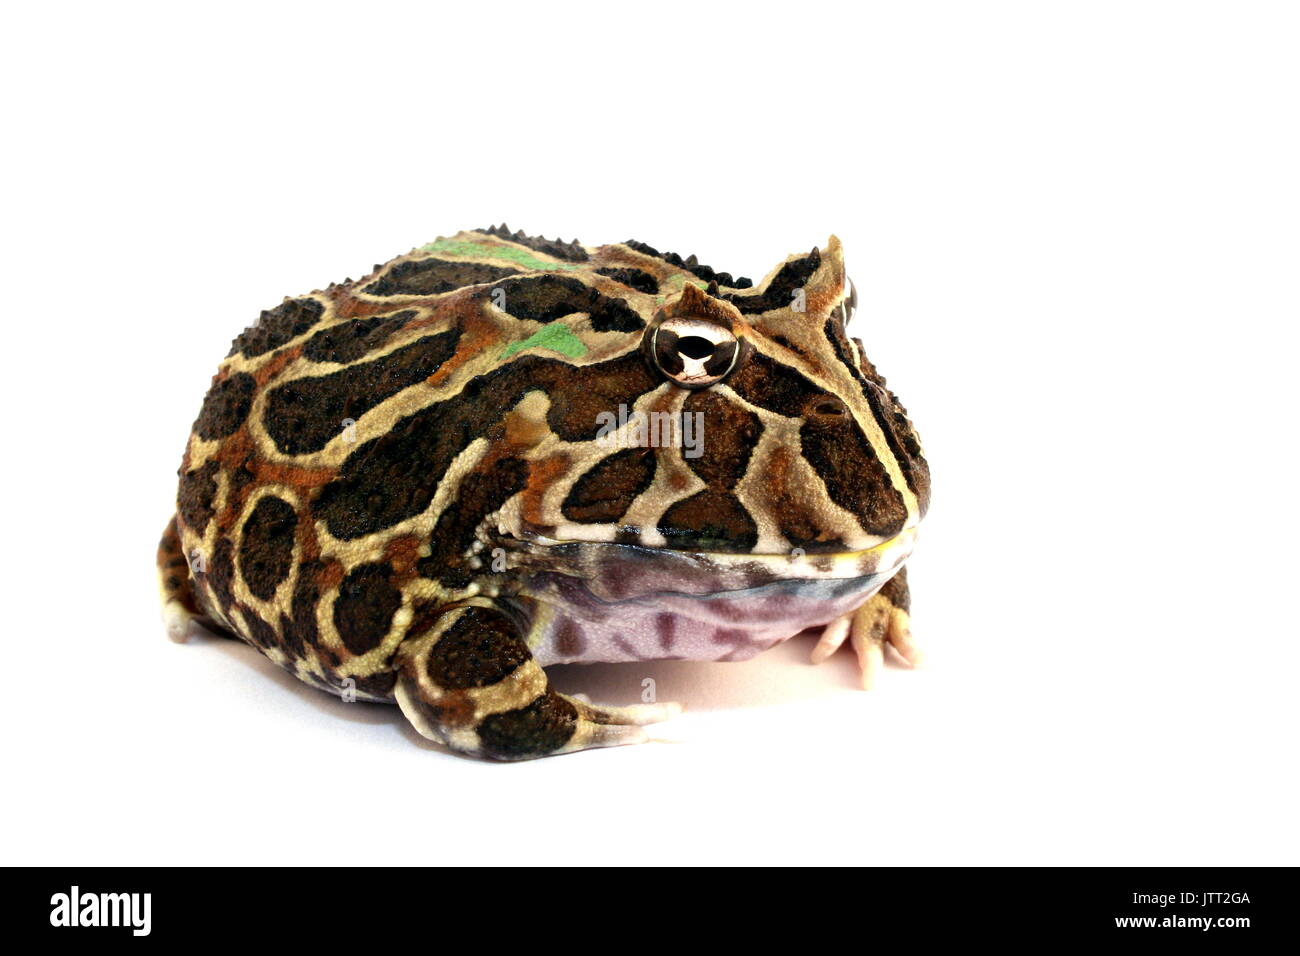 Cranwell's Horned Frog, Ceratophrys cranwelli, adult female Argentinian Pacman Frog on White Background, Captive Stock Photo